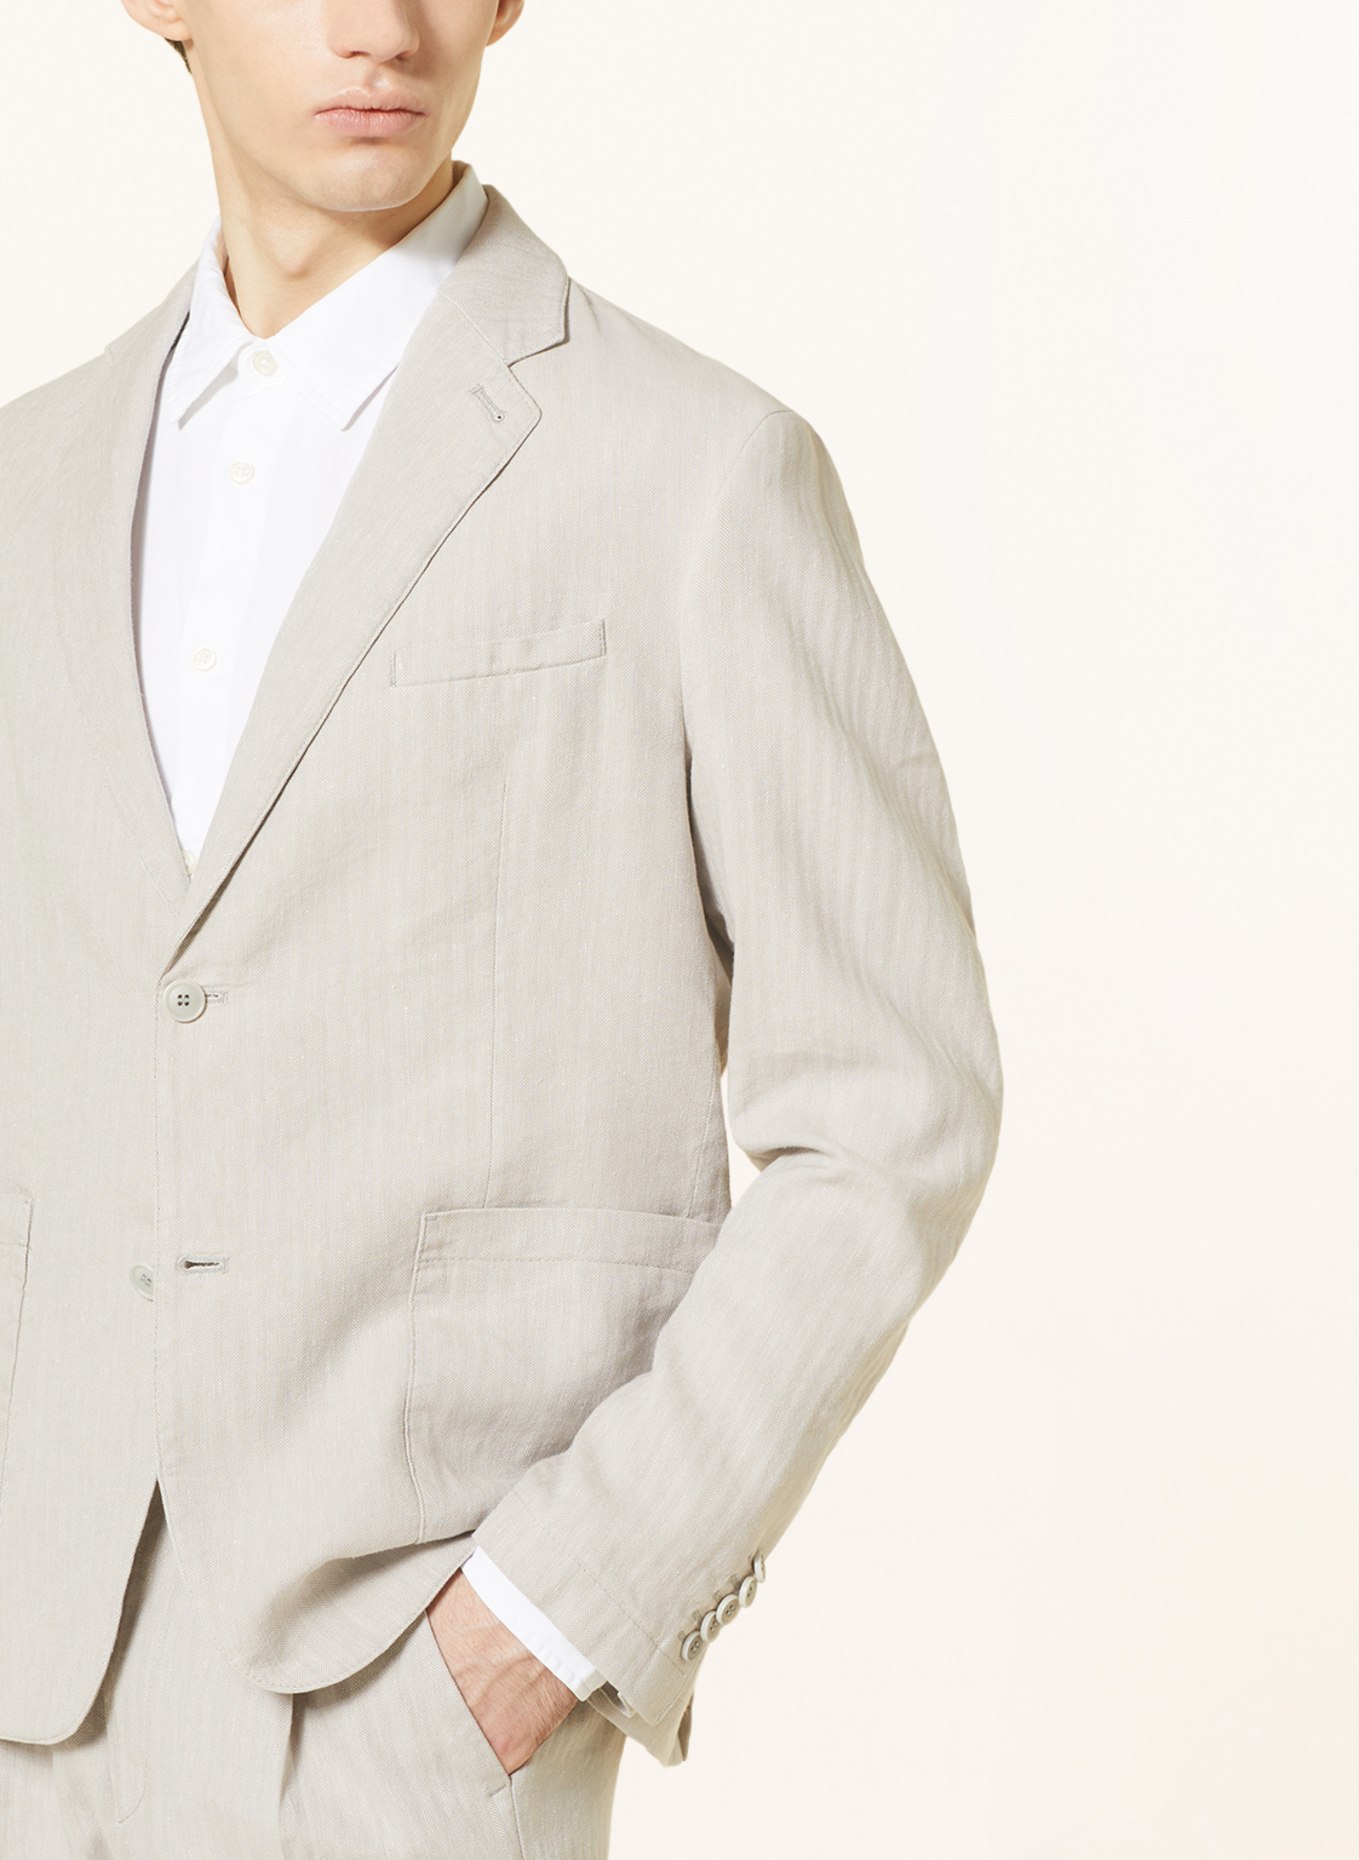 DRYKORN Suit jacket CARLES regular fit with linen, Color: LIGHT GRAY (Image 5)